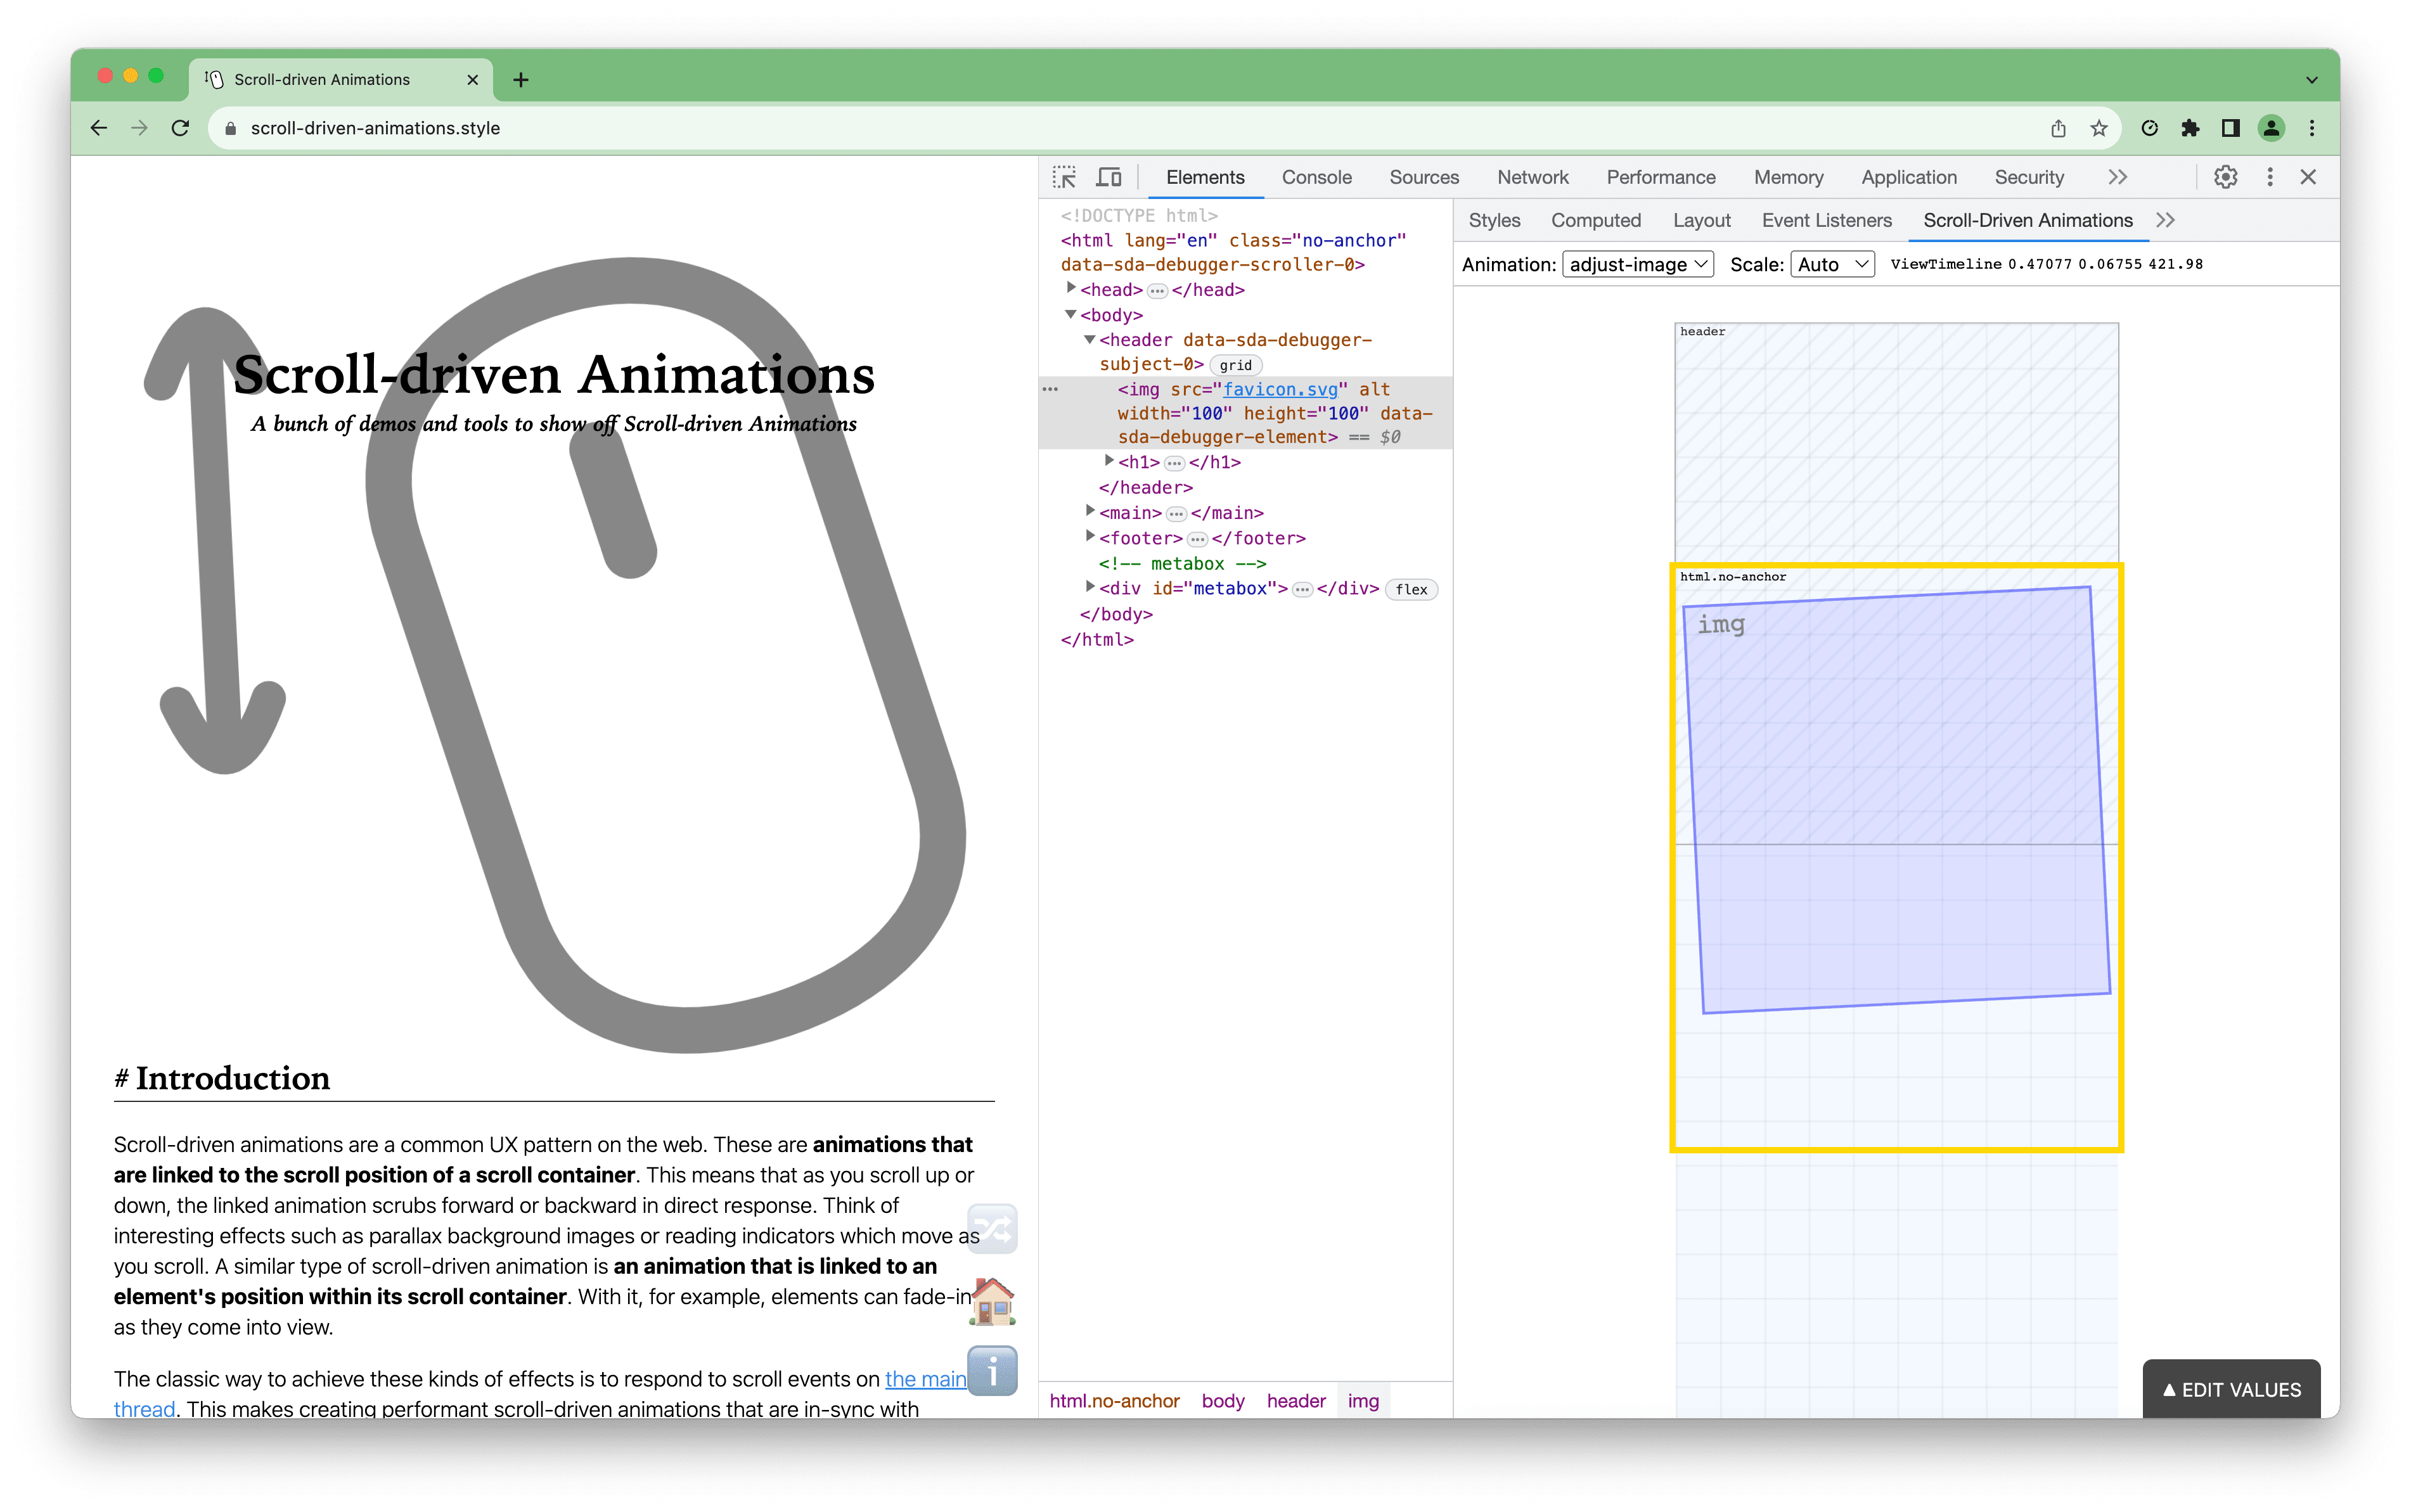 I’m extremely pleased to announce the release of Scroll-Driven Animations Debugger, a DevTools extension to visualize and debug Scroll-Driven Animat